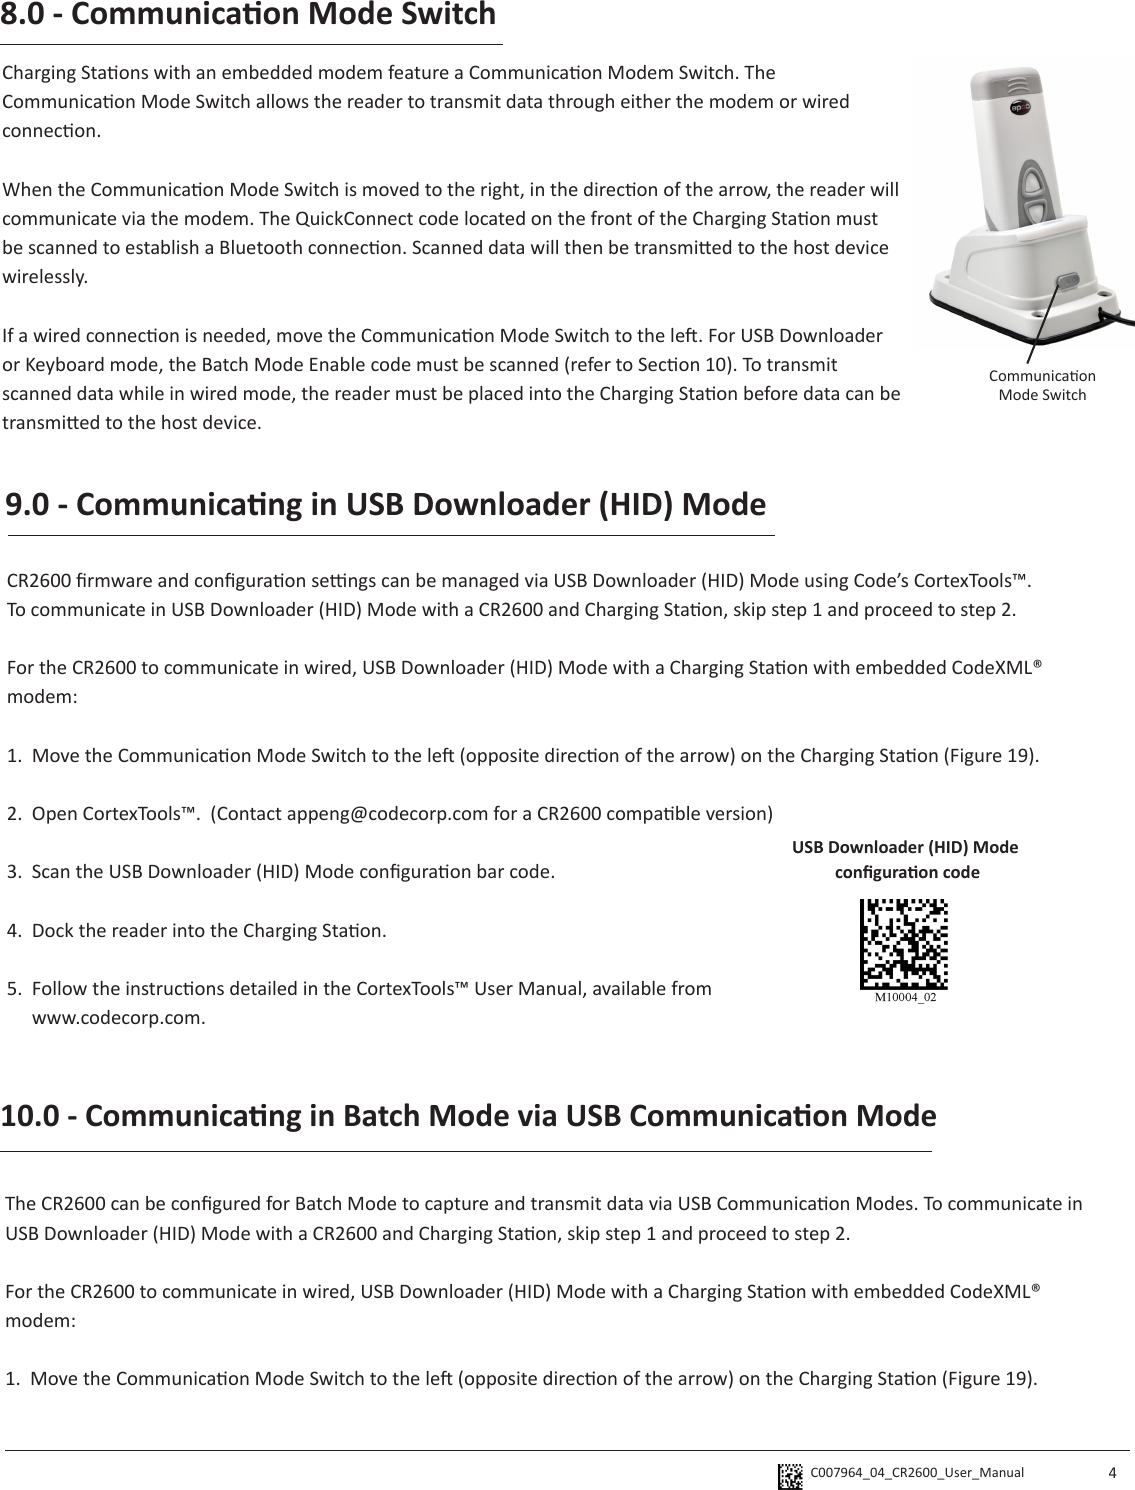 C007964_04_CR2600_User_Manual  48.0 - Communicaon Mode SwitchCharging Staons with an embedded modem feature a Communicaon Modem Switch. The Communicaon Mode Switch allows the reader to transmit data through either the modem or wired connecon. When the Communicaon Mode Switch is moved to the right, in the direcon of the arrow, the reader will communicate via the modem. The QuickConnect code located on the front of the Charging Staon must be scanned to establish a Bluetooth connecon. Scanned data will then be transmied to the host device wirelessly. If a wired connecon is needed, move the Communicaon Mode Switch to the le. For USB Downloader or Keyboard mode, the Batch Mode Enable code must be scanned (refer to Secon 10). To transmit scanned data while in wired mode, the reader must be placed into the Charging Staon before data can be transmied to the host device. 9.0 - Communicang in USB Downloader (HID) ModeCR2600 rmware and conguraon sengs can be managed via USB Downloader (HID) Mode using Code’s CortexTools™.To communicate in USB Downloader (HID) Mode with a CR2600 and Charging Staon, skip step 1 and proceed to step 2.For the CR2600 to communicate in wired, USB Downloader (HID) Mode with a Charging Staon with embedded CodeXML® modem:1.  Move the Communicaon Mode Switch to the le (opposite direcon of the arrow) on the Charging Staon (Figure 19).2.  Open CortexTools™.  (Contact appeng@codecorp.com for a CR2600 compable version)3.  Scan the USB Downloader (HID) Mode conguraon bar code.4.  Dock the reader into the Charging Staon.5.  Follow the instrucons detailed in the CortexTools™ User Manual, available from   www.codecorp.com.USB Downloader (HID) Mode conguraon codeCommunicaon Mode SwitchThe CR2600 can be congured for Batch Mode to capture and transmit data via USB Communicaon Modes. To communicate in USB Downloader (HID) Mode with a CR2600 and Charging Staon, skip step 1 and proceed to step 2.For the CR2600 to communicate in wired, USB Downloader (HID) Mode with a Charging Staon with embedded CodeXML® modem:1.  Move the Communicaon Mode Switch to the le (opposite direcon of the arrow) on the Charging Staon (Figure 19).10.0 - Communicang in Batch Mode via USB Communicaon Mode